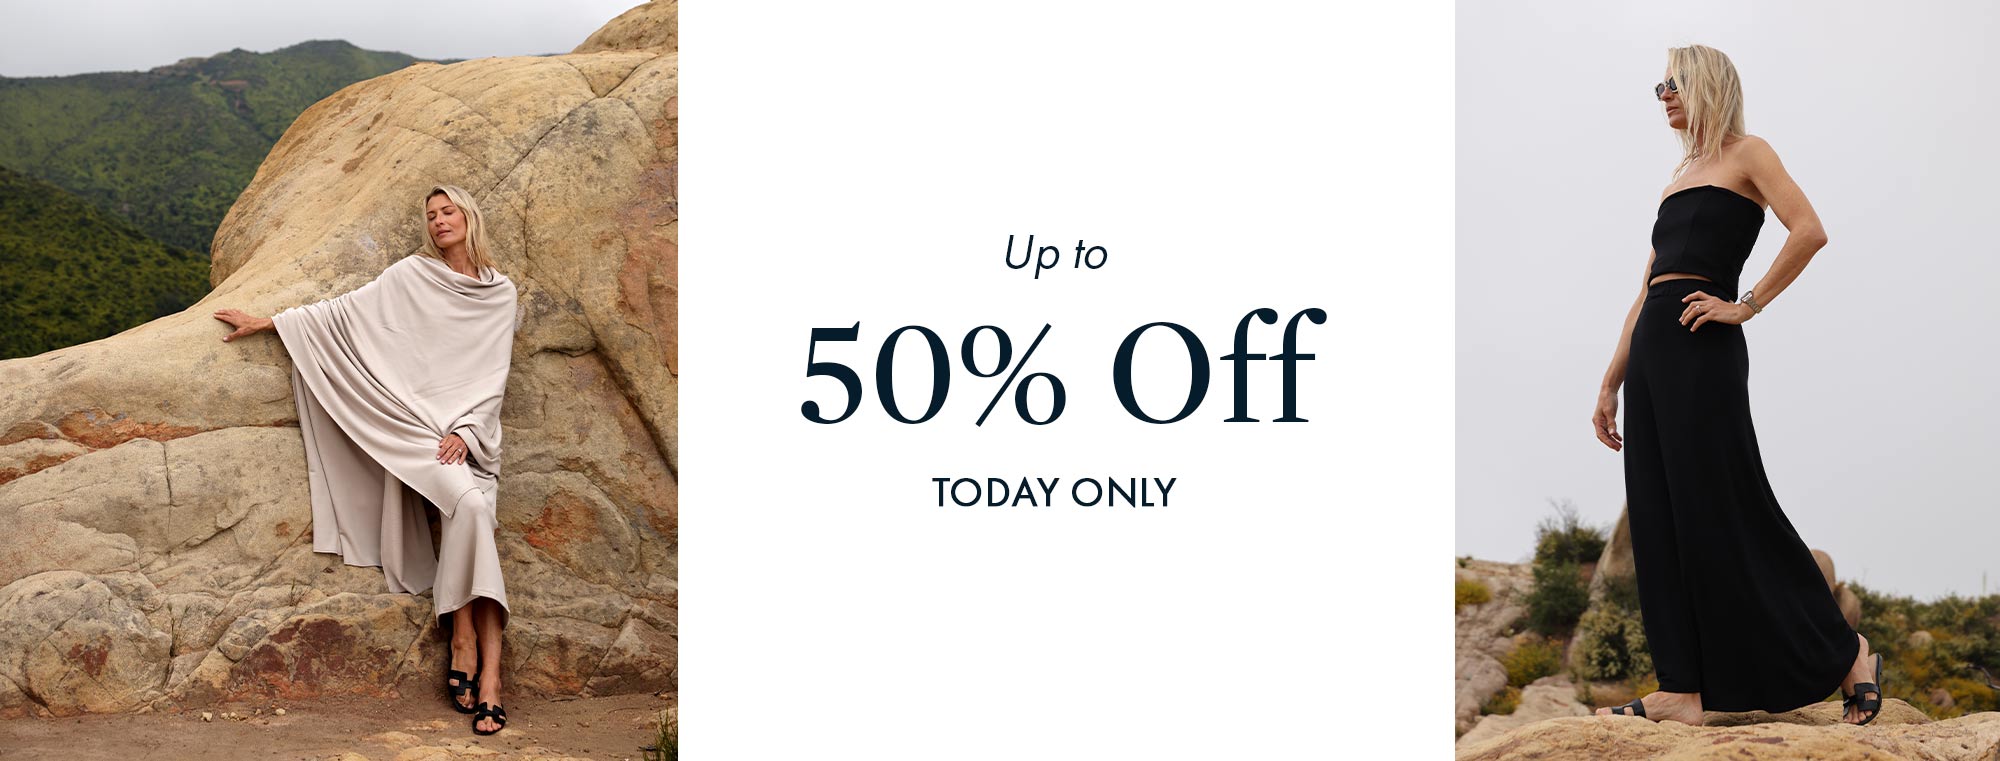 Save up to 50% Today Only!